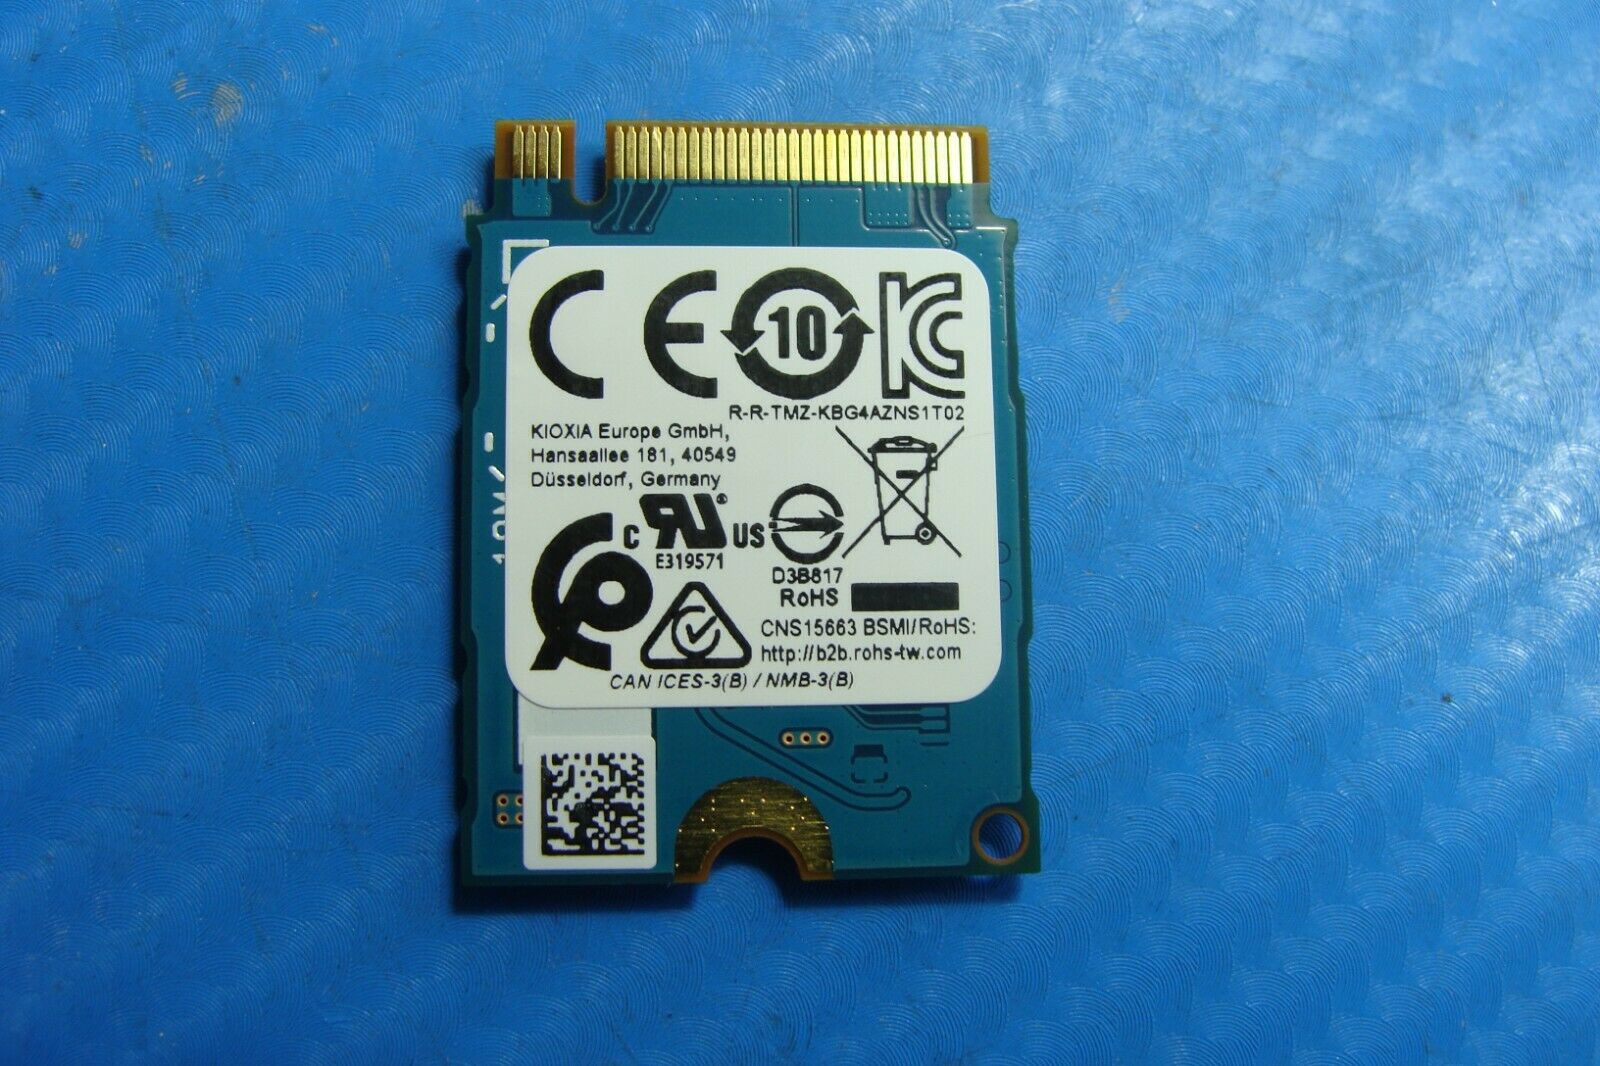 Dell 5406 2-in-1 Kioxia 256GB M.2 NVMe SSD Solid State Drive kbg40zns256g fwjtg - Laptop Parts - Buy Authentic Computer Parts - Top Seller Ebay